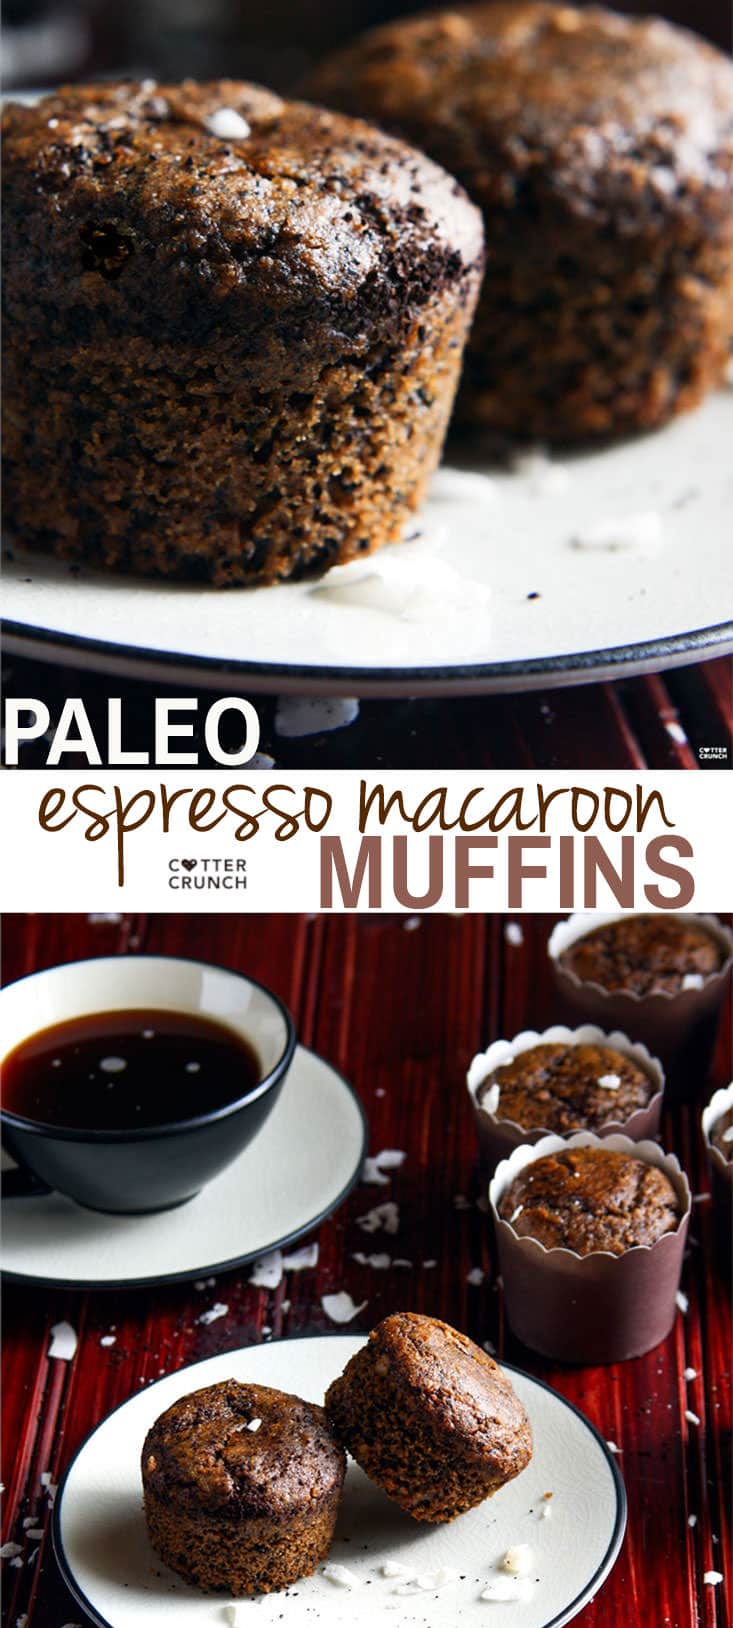 A Light and Healthy Dessert For Coffee Lovers! Paleo Espresso Macaroon Muffins . @cottercrunch